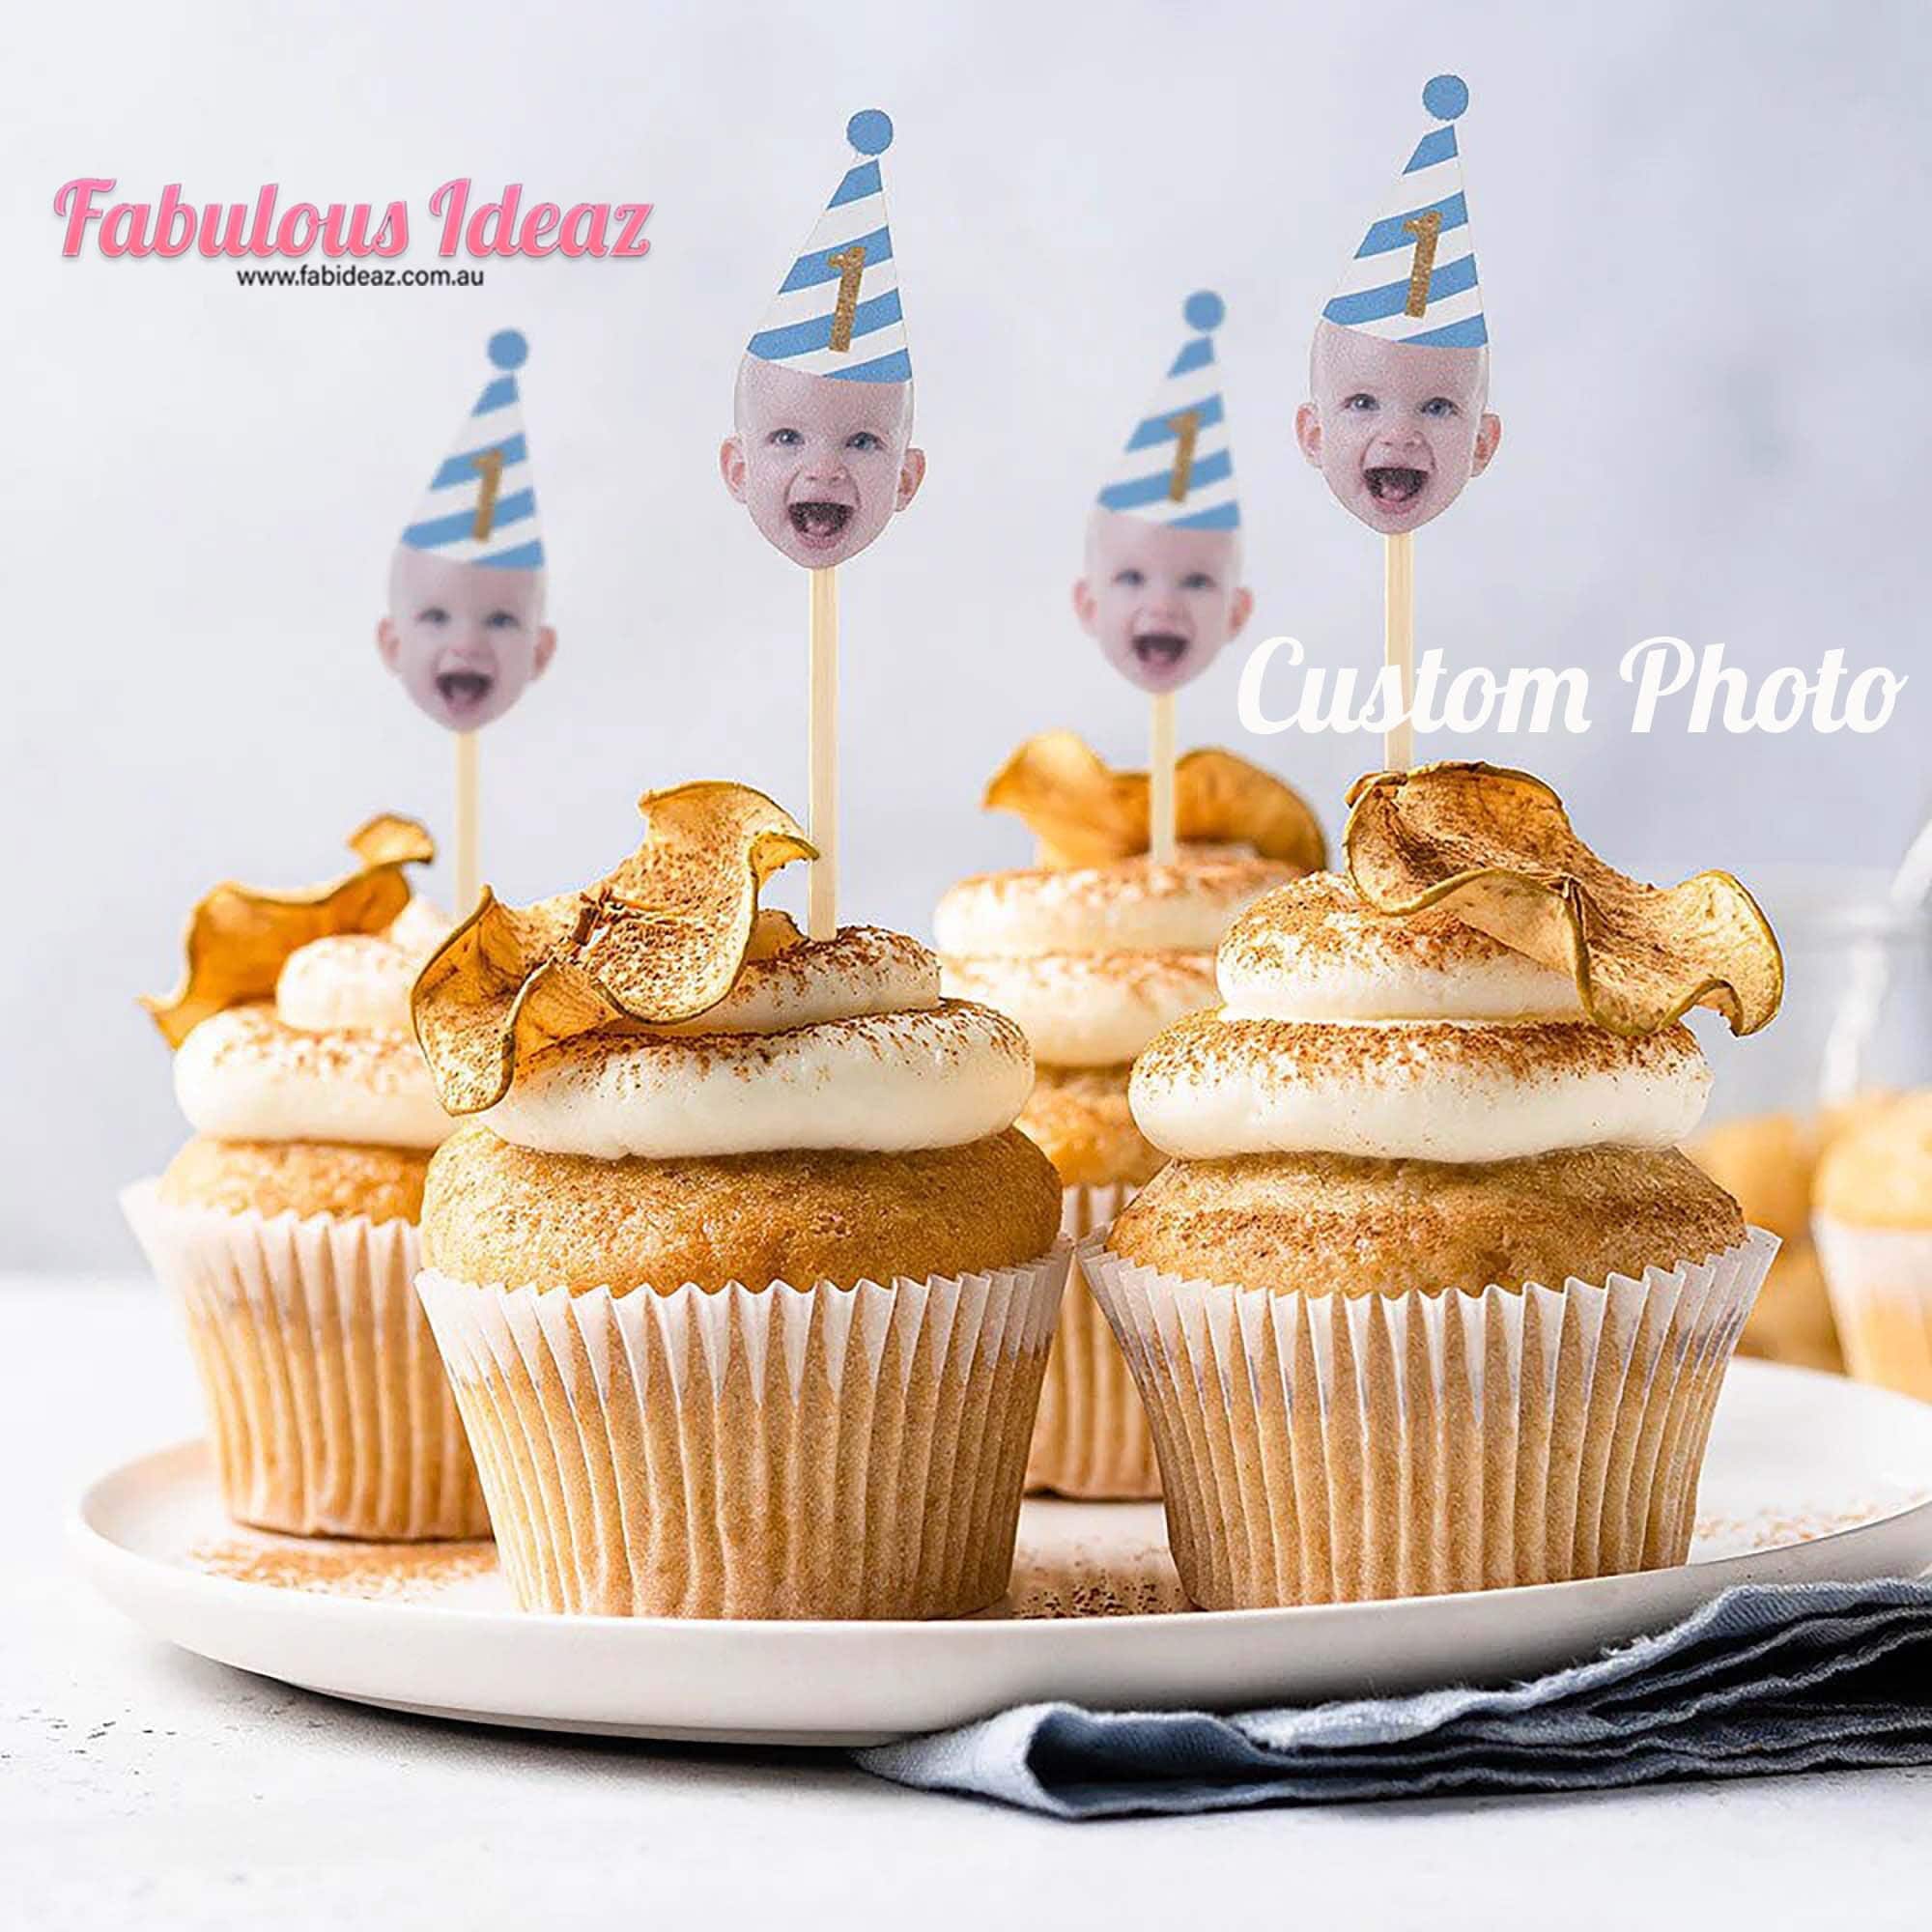 Personalized Face Photo Cupcake Toppers for Birthday Party Decorations with Hats Custom Message Birthday Favor Gift Cup Cake Decoration